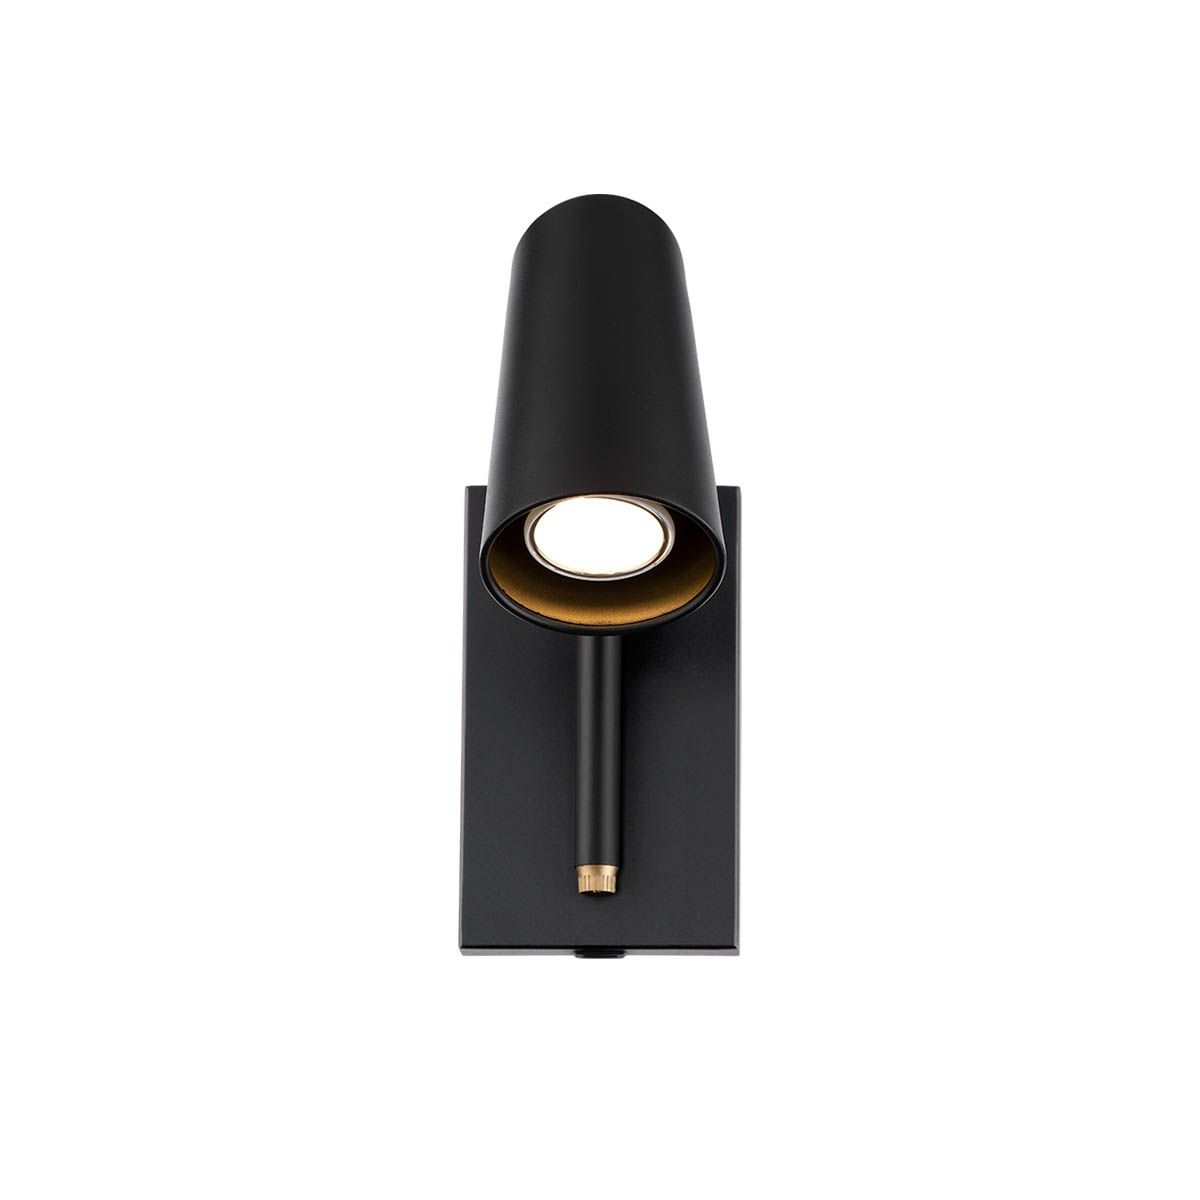 Stylus 11 in. LED Wall Sconce Black & Gold finish